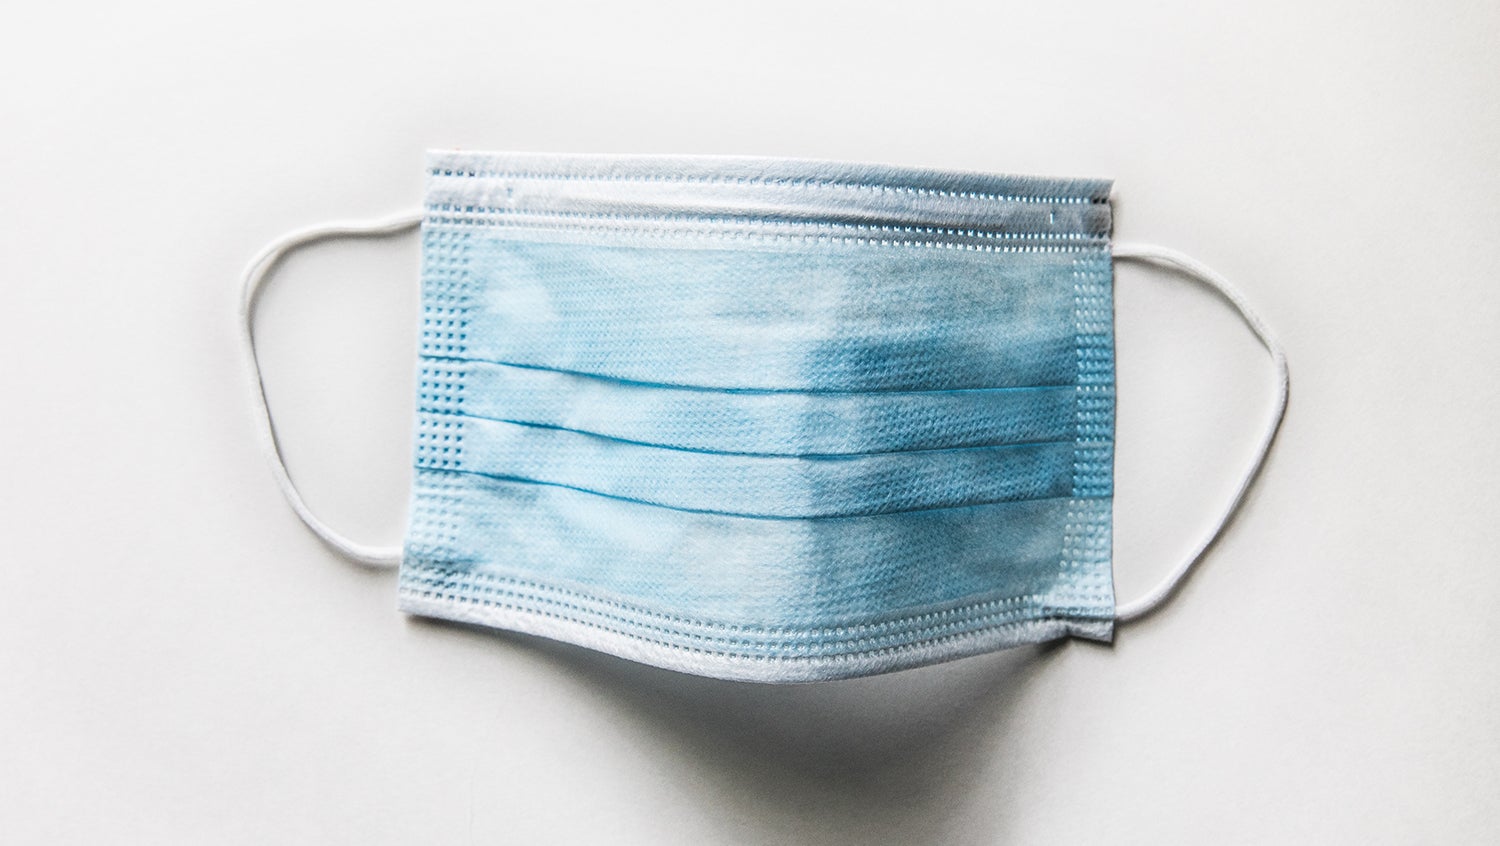 Blue surgical mask on a white background